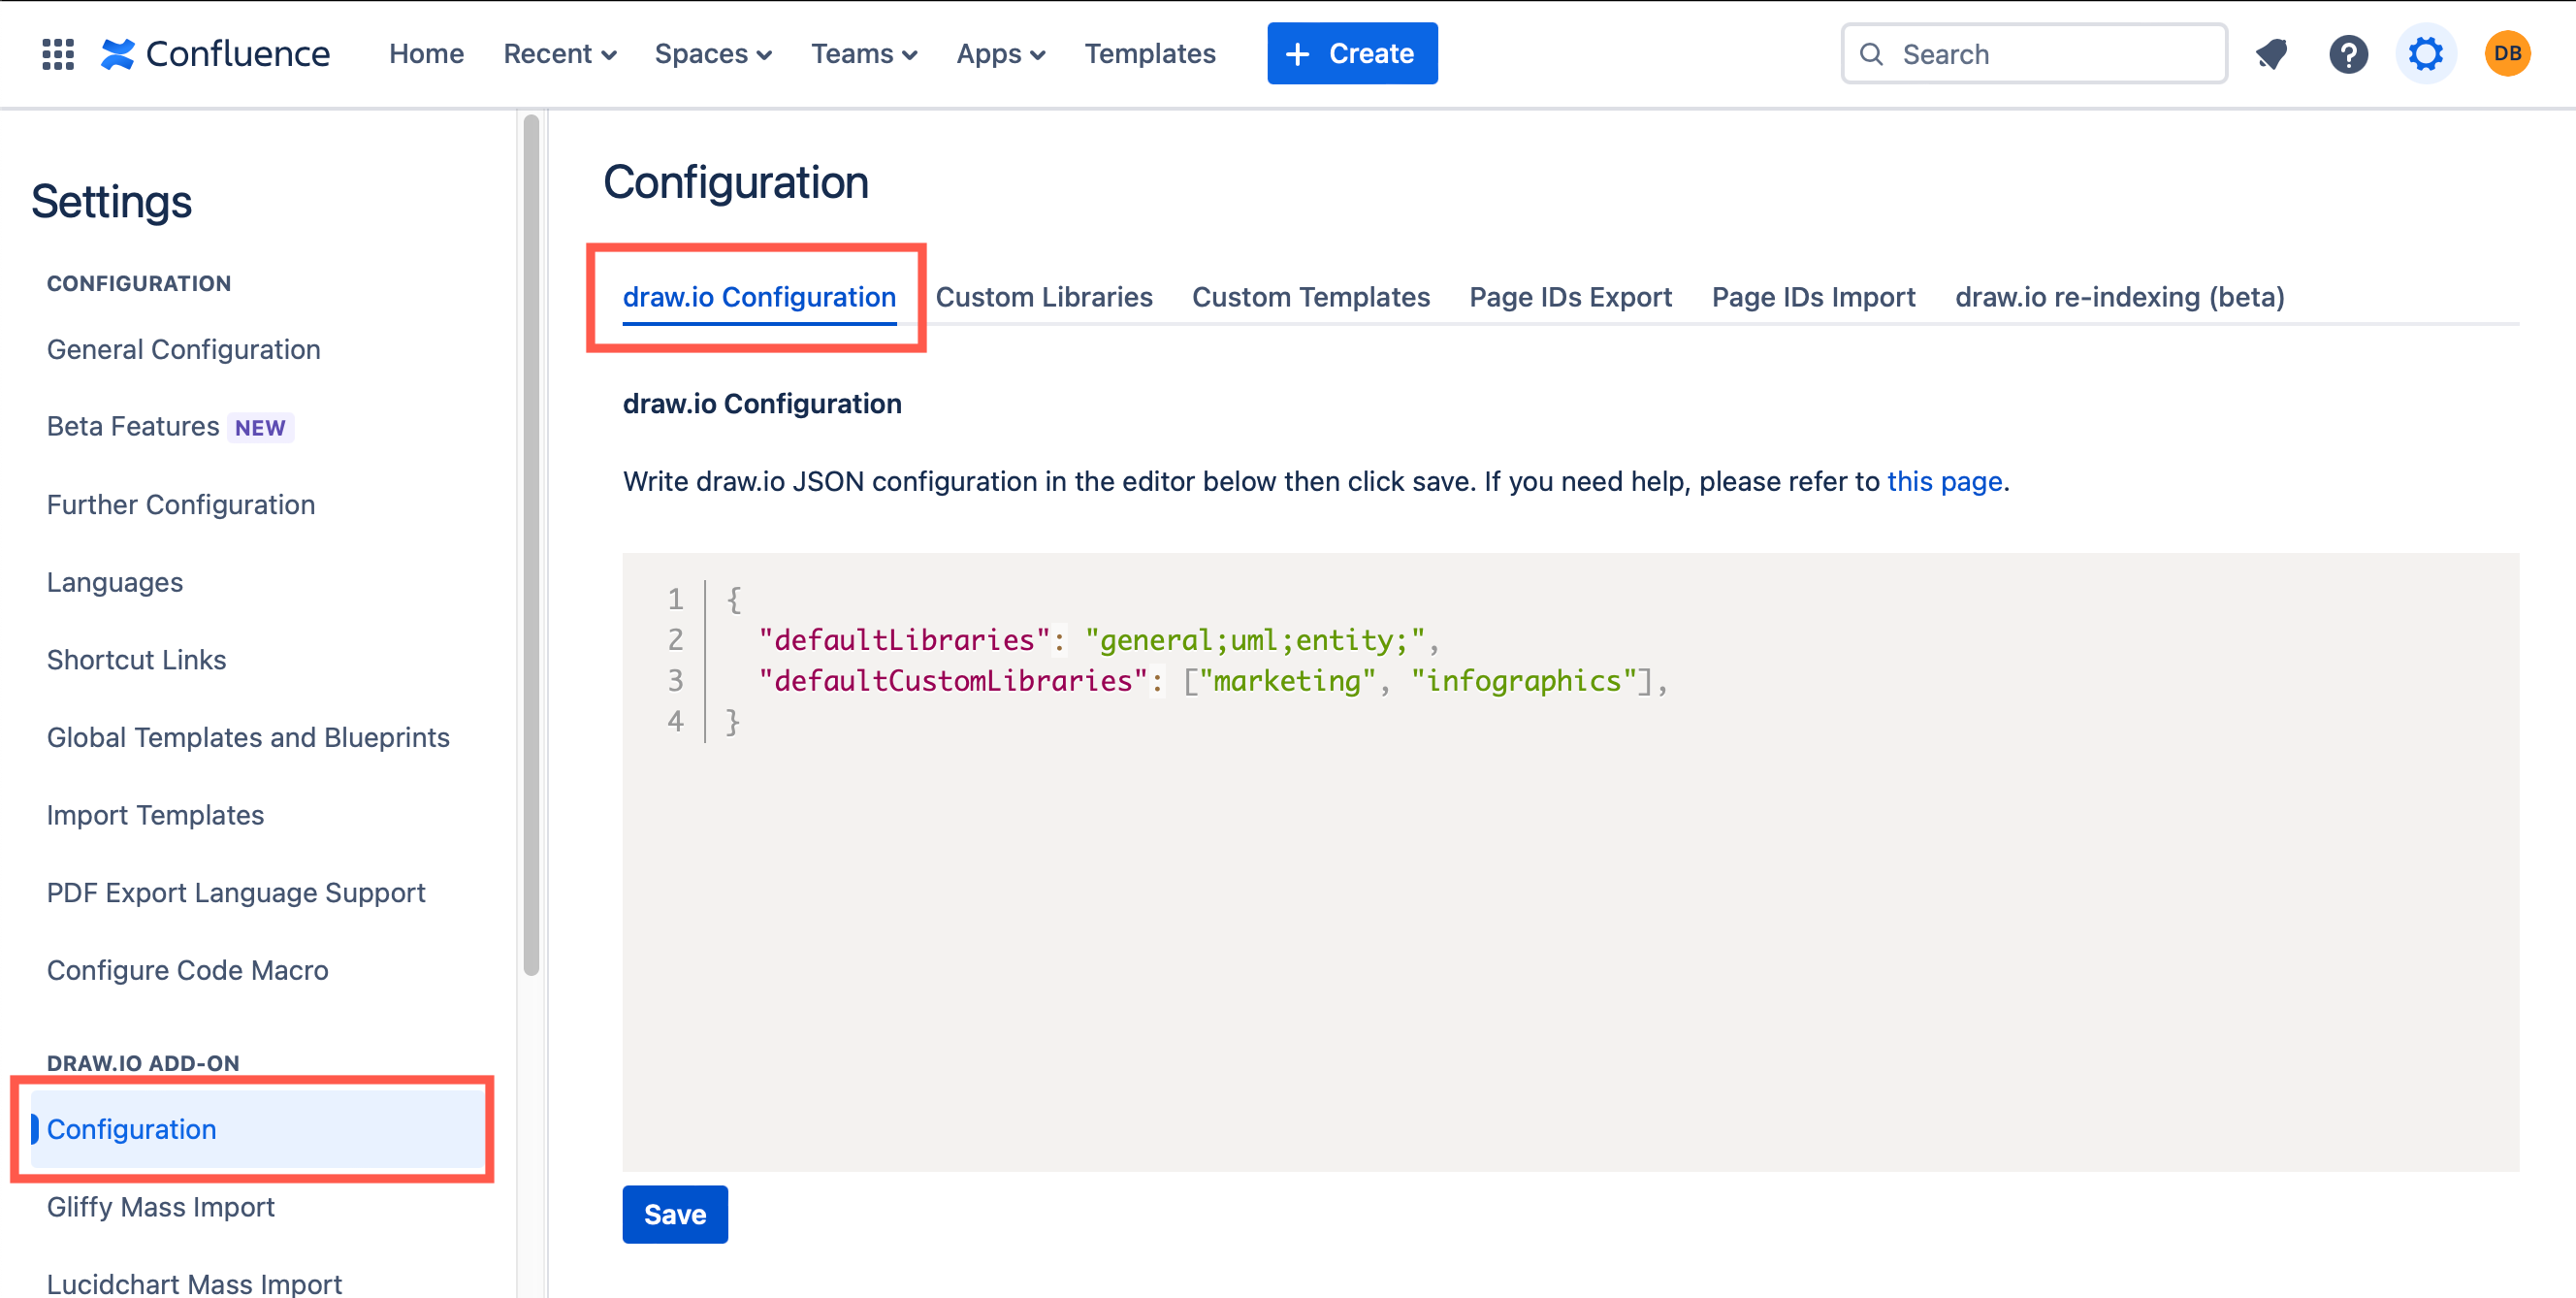 Open shape libraries and custom libraries by default in draw.io for Confluence Cloud